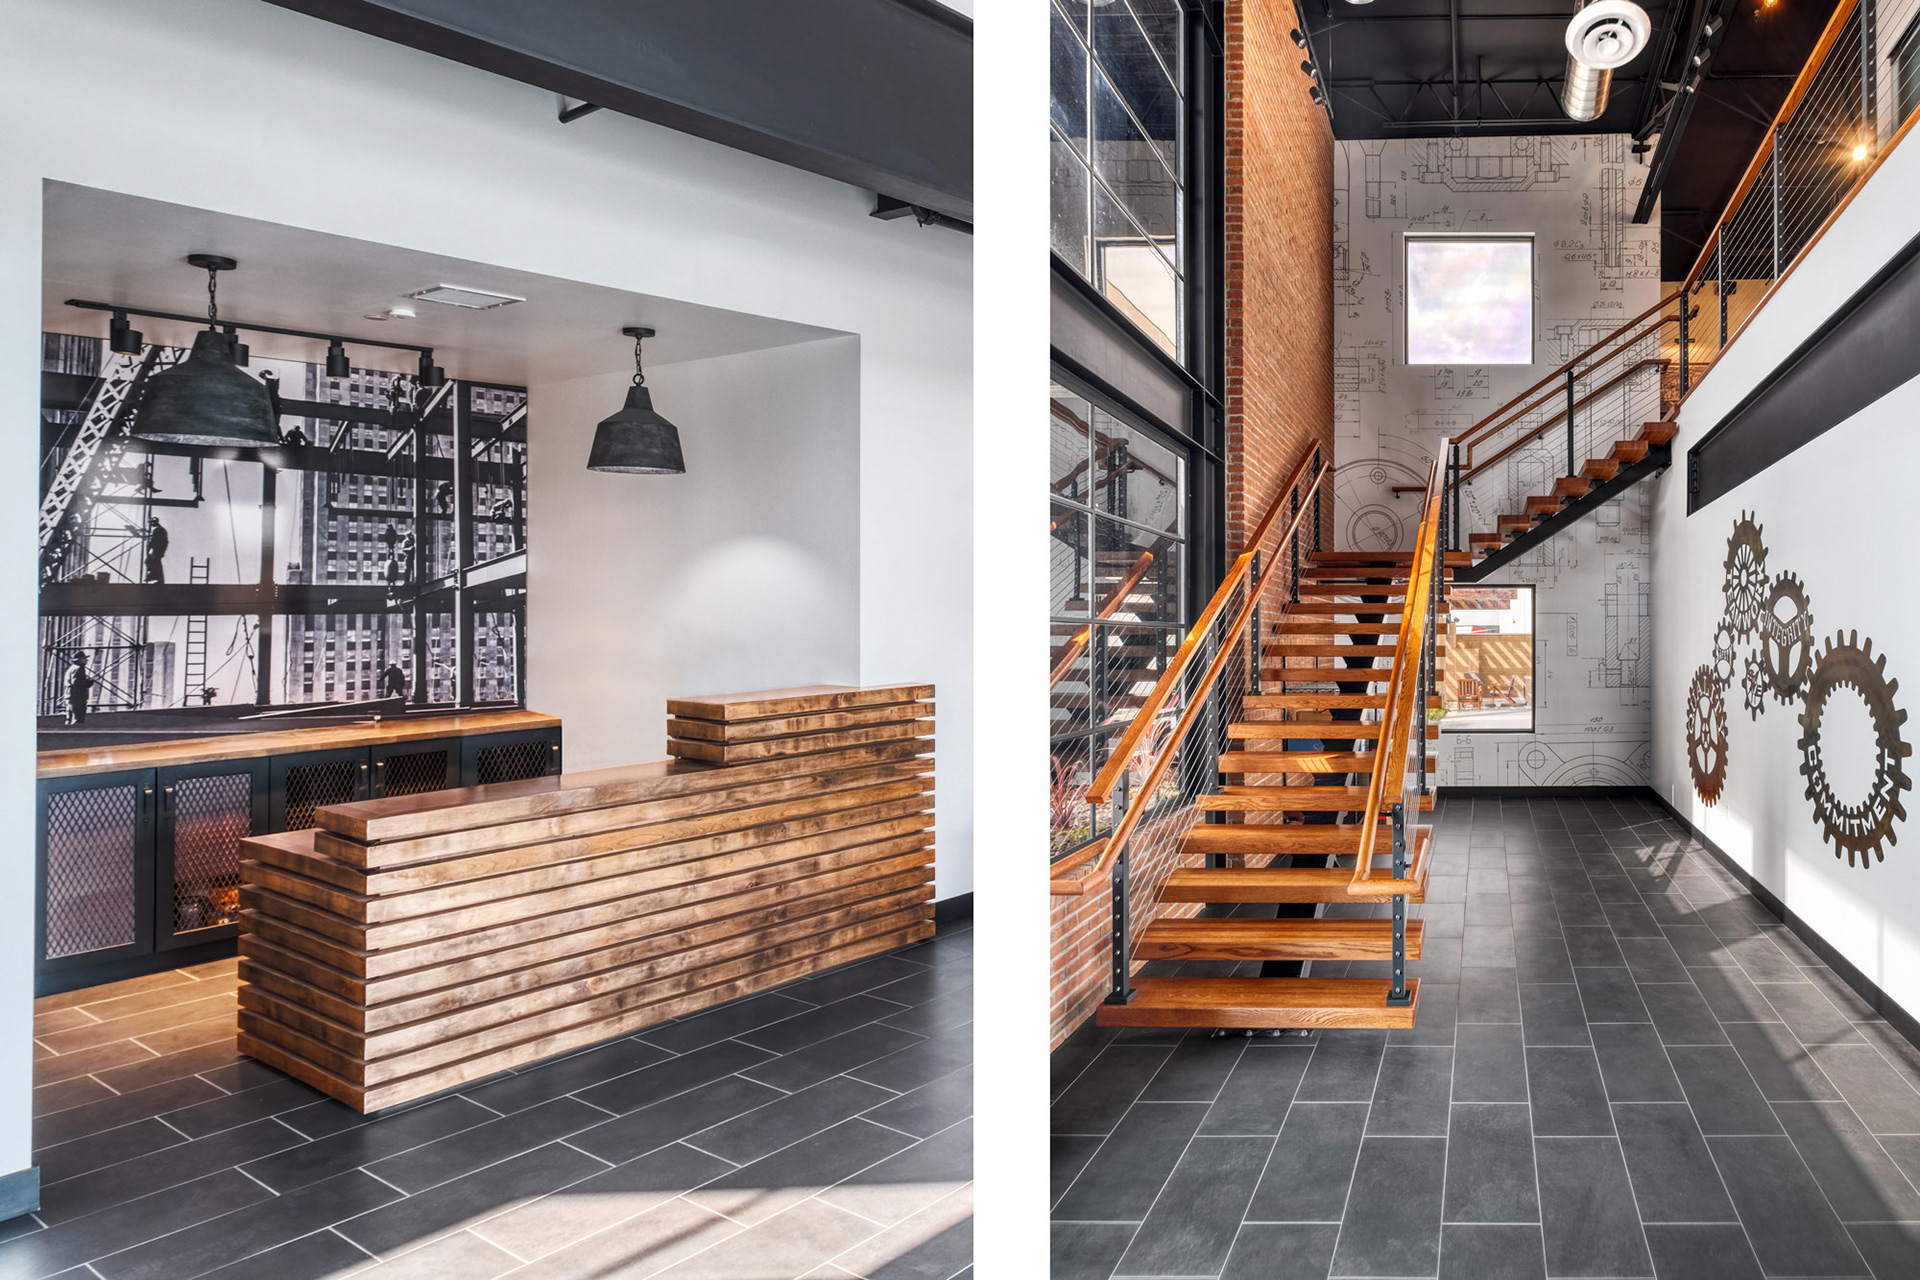 Image on left shows front desk with black and white vinyl mural behind it. Image on right shows stairwell with vinyl murals on walls